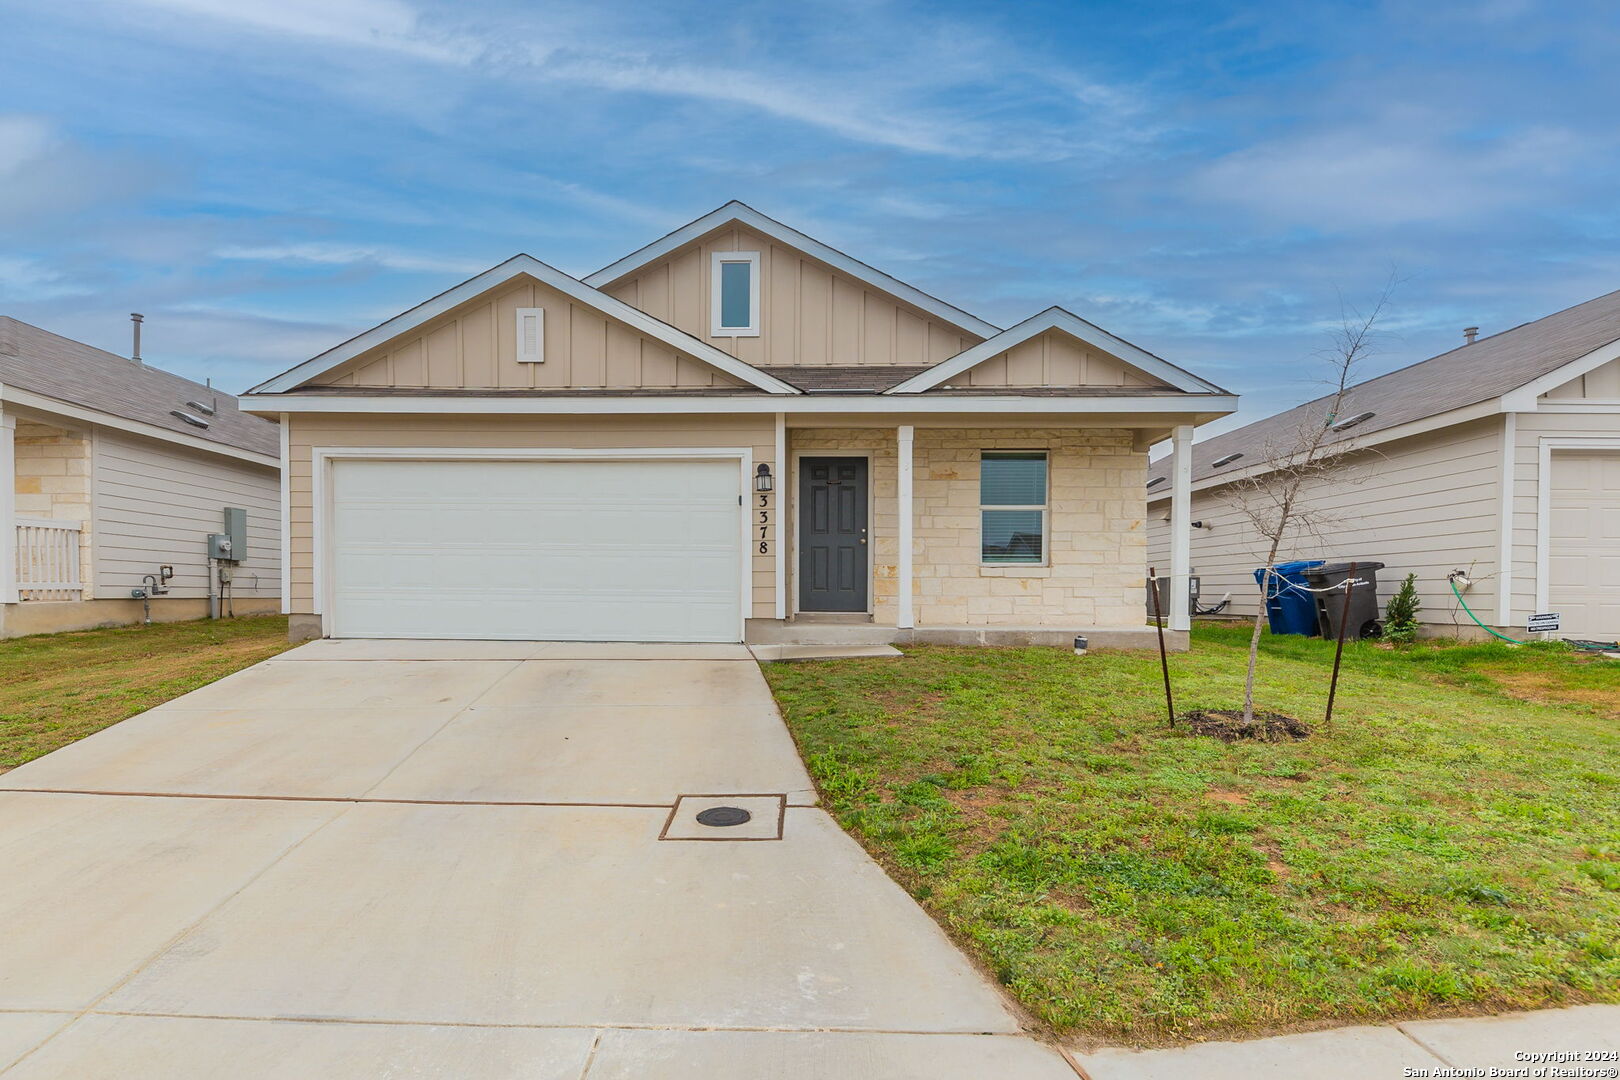 Photo of 3378 Carducci Dr in Converse, TX